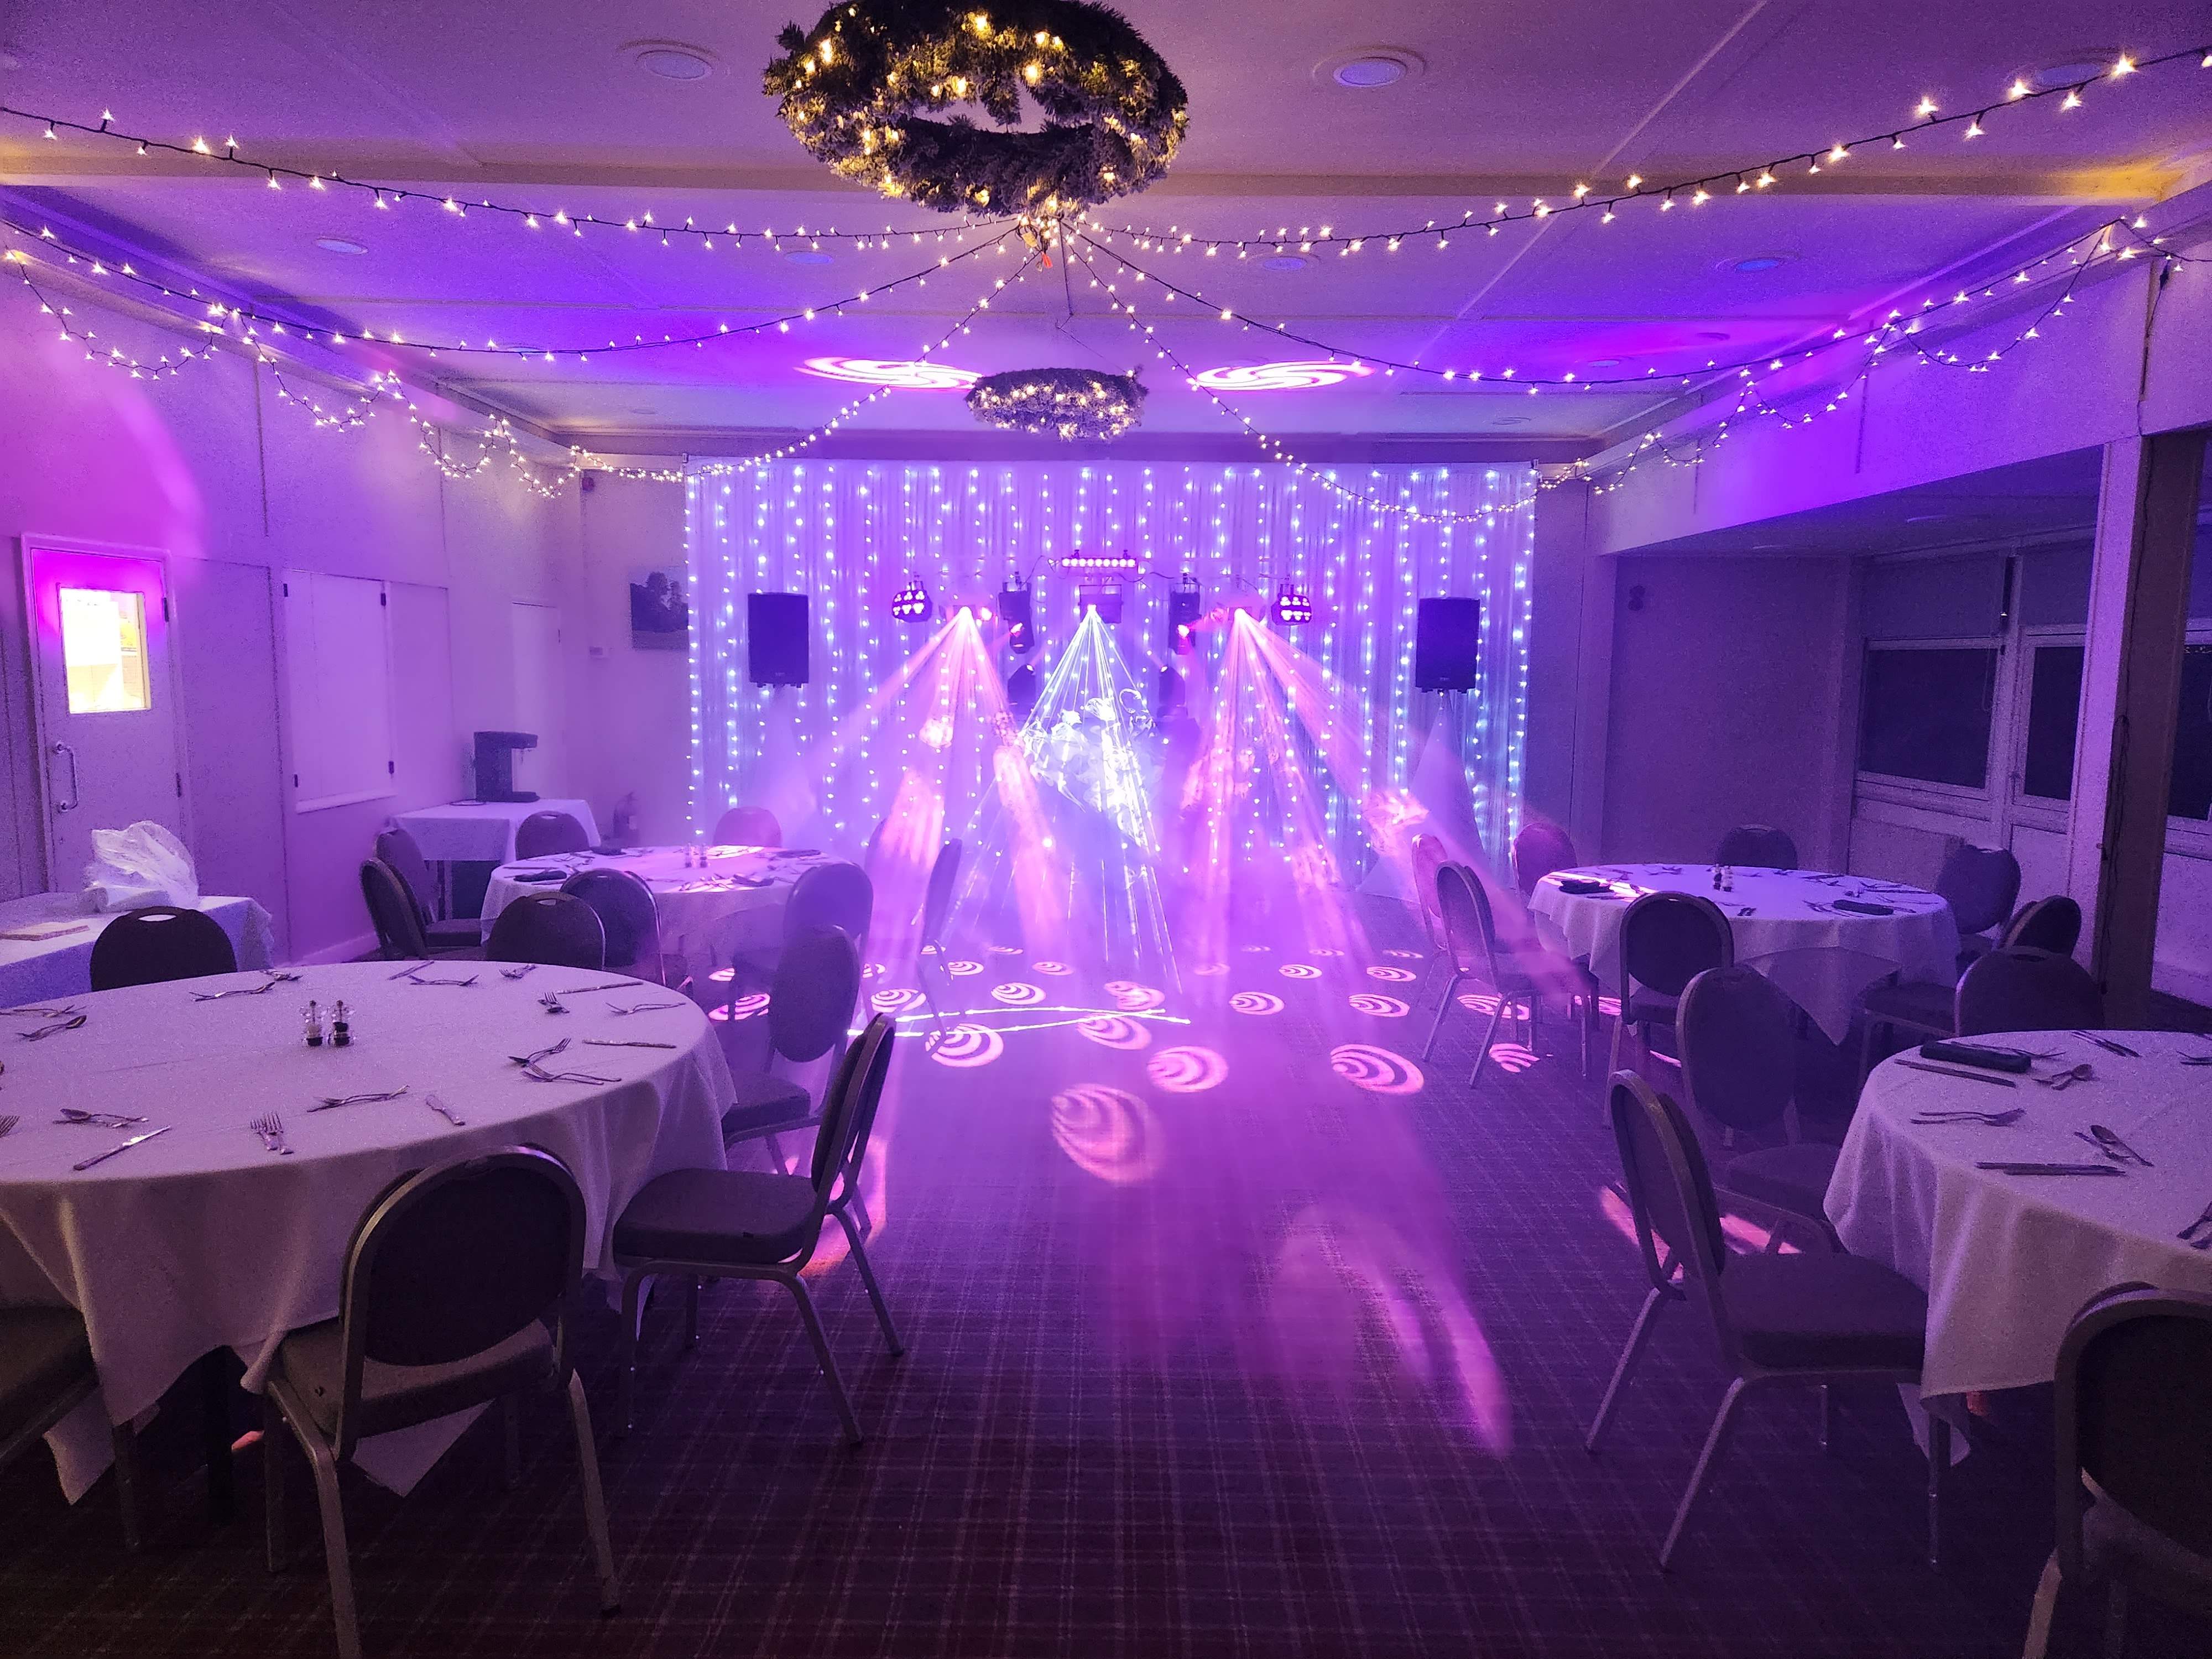 Setup Ready for a great christmas party for a local school end of 2022